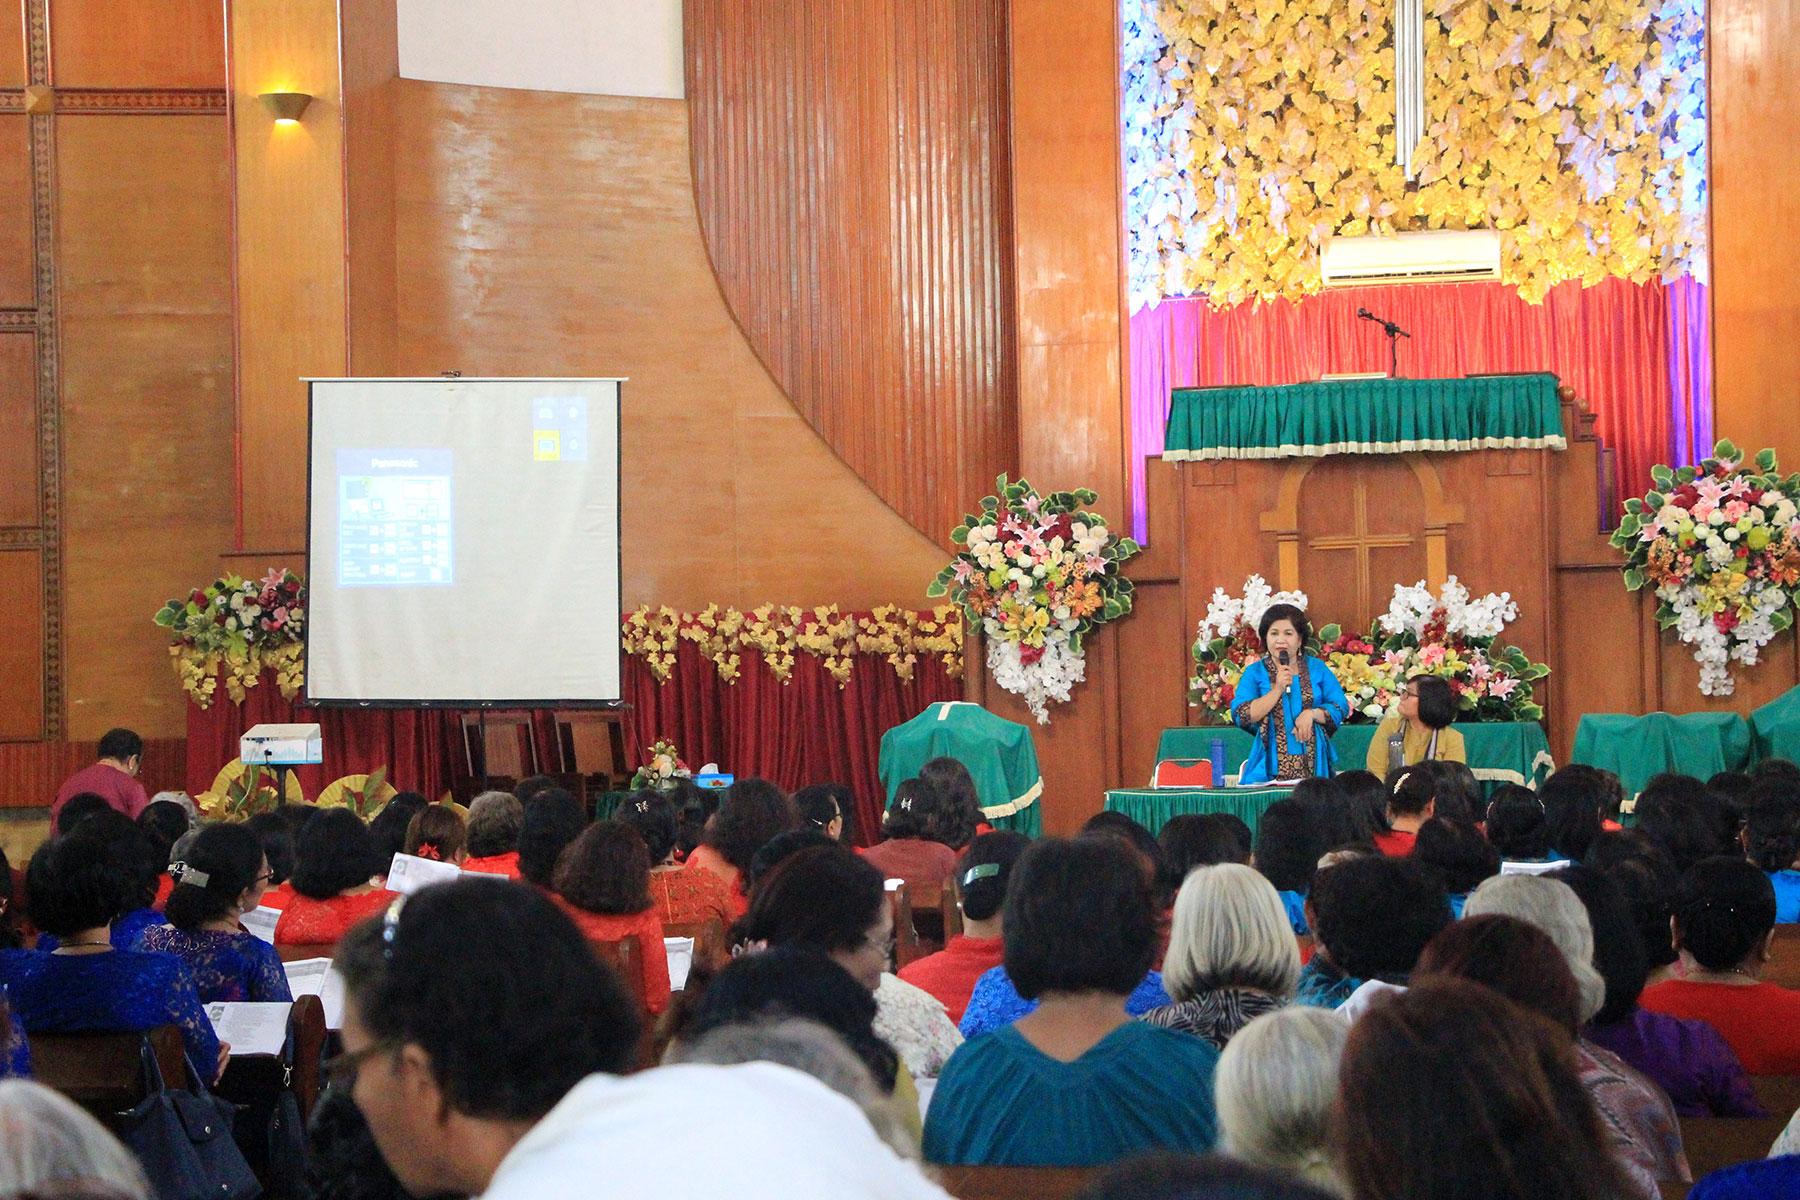 Several hundred women from the Christian Protestant Church in Indonesia (GKPI) gathered at a church in Medan City, North Sumatra, on 19 August 2019 to hear about ways of implementing the Lutheran World Federation's (LWF) Gender Justice Policy in their own local context. Photo: GKPI